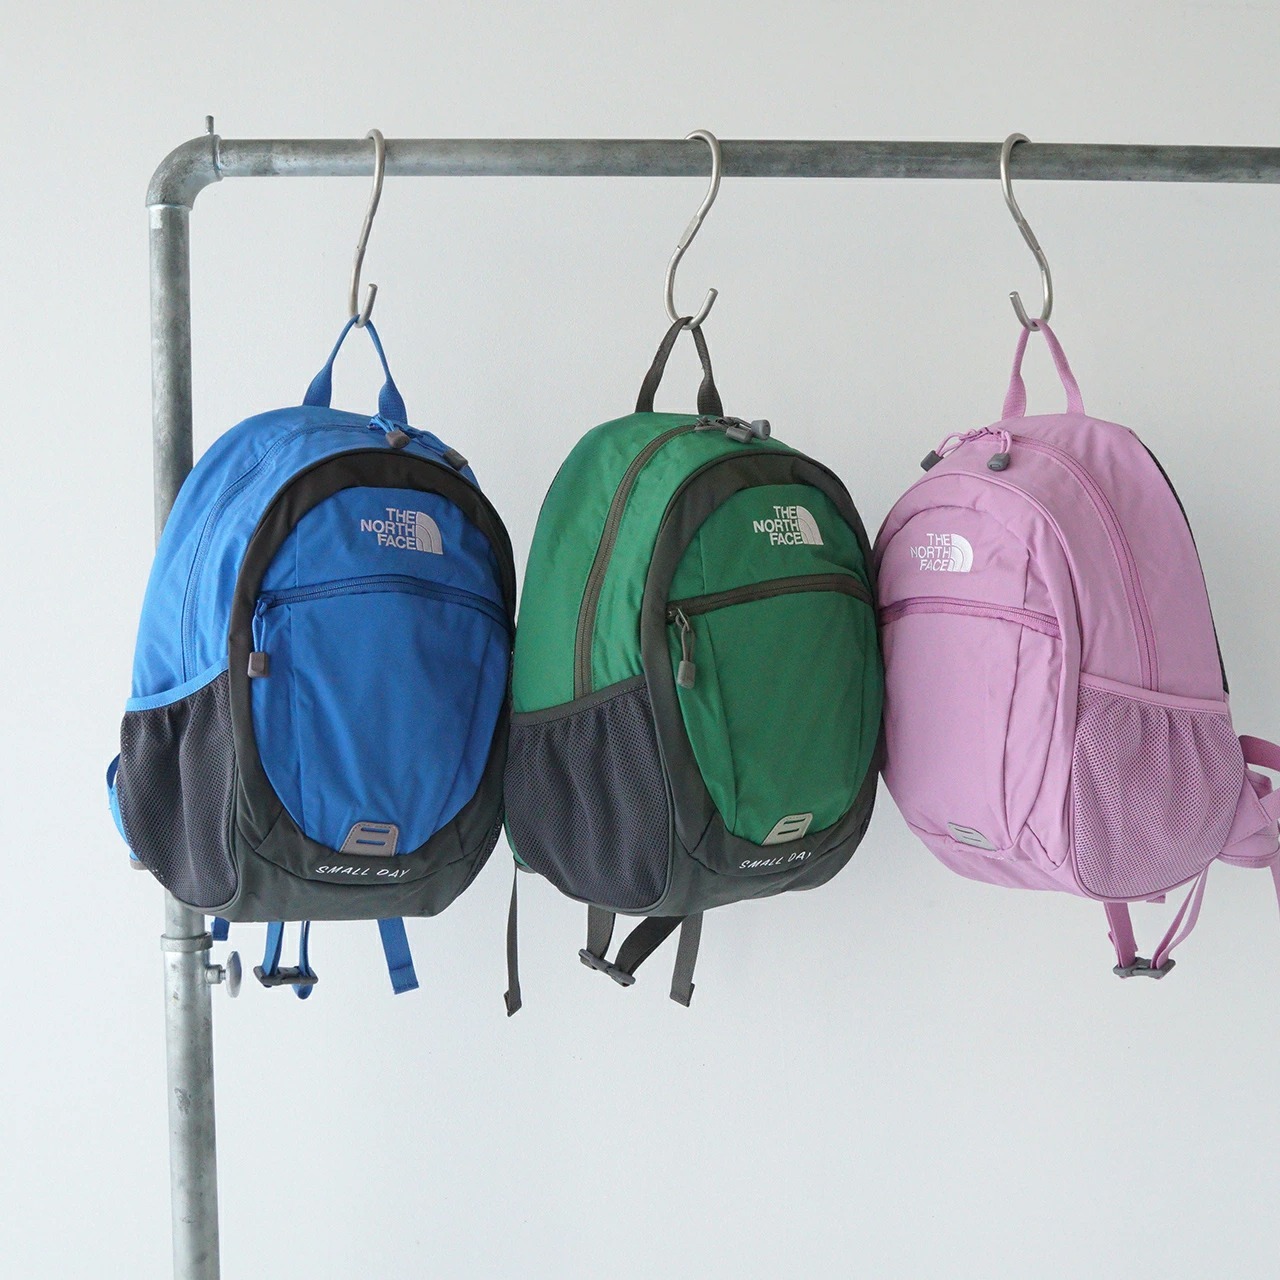 NMJ72312 日本THE NORTH FACE K SMALL DAY KIDS 後背包